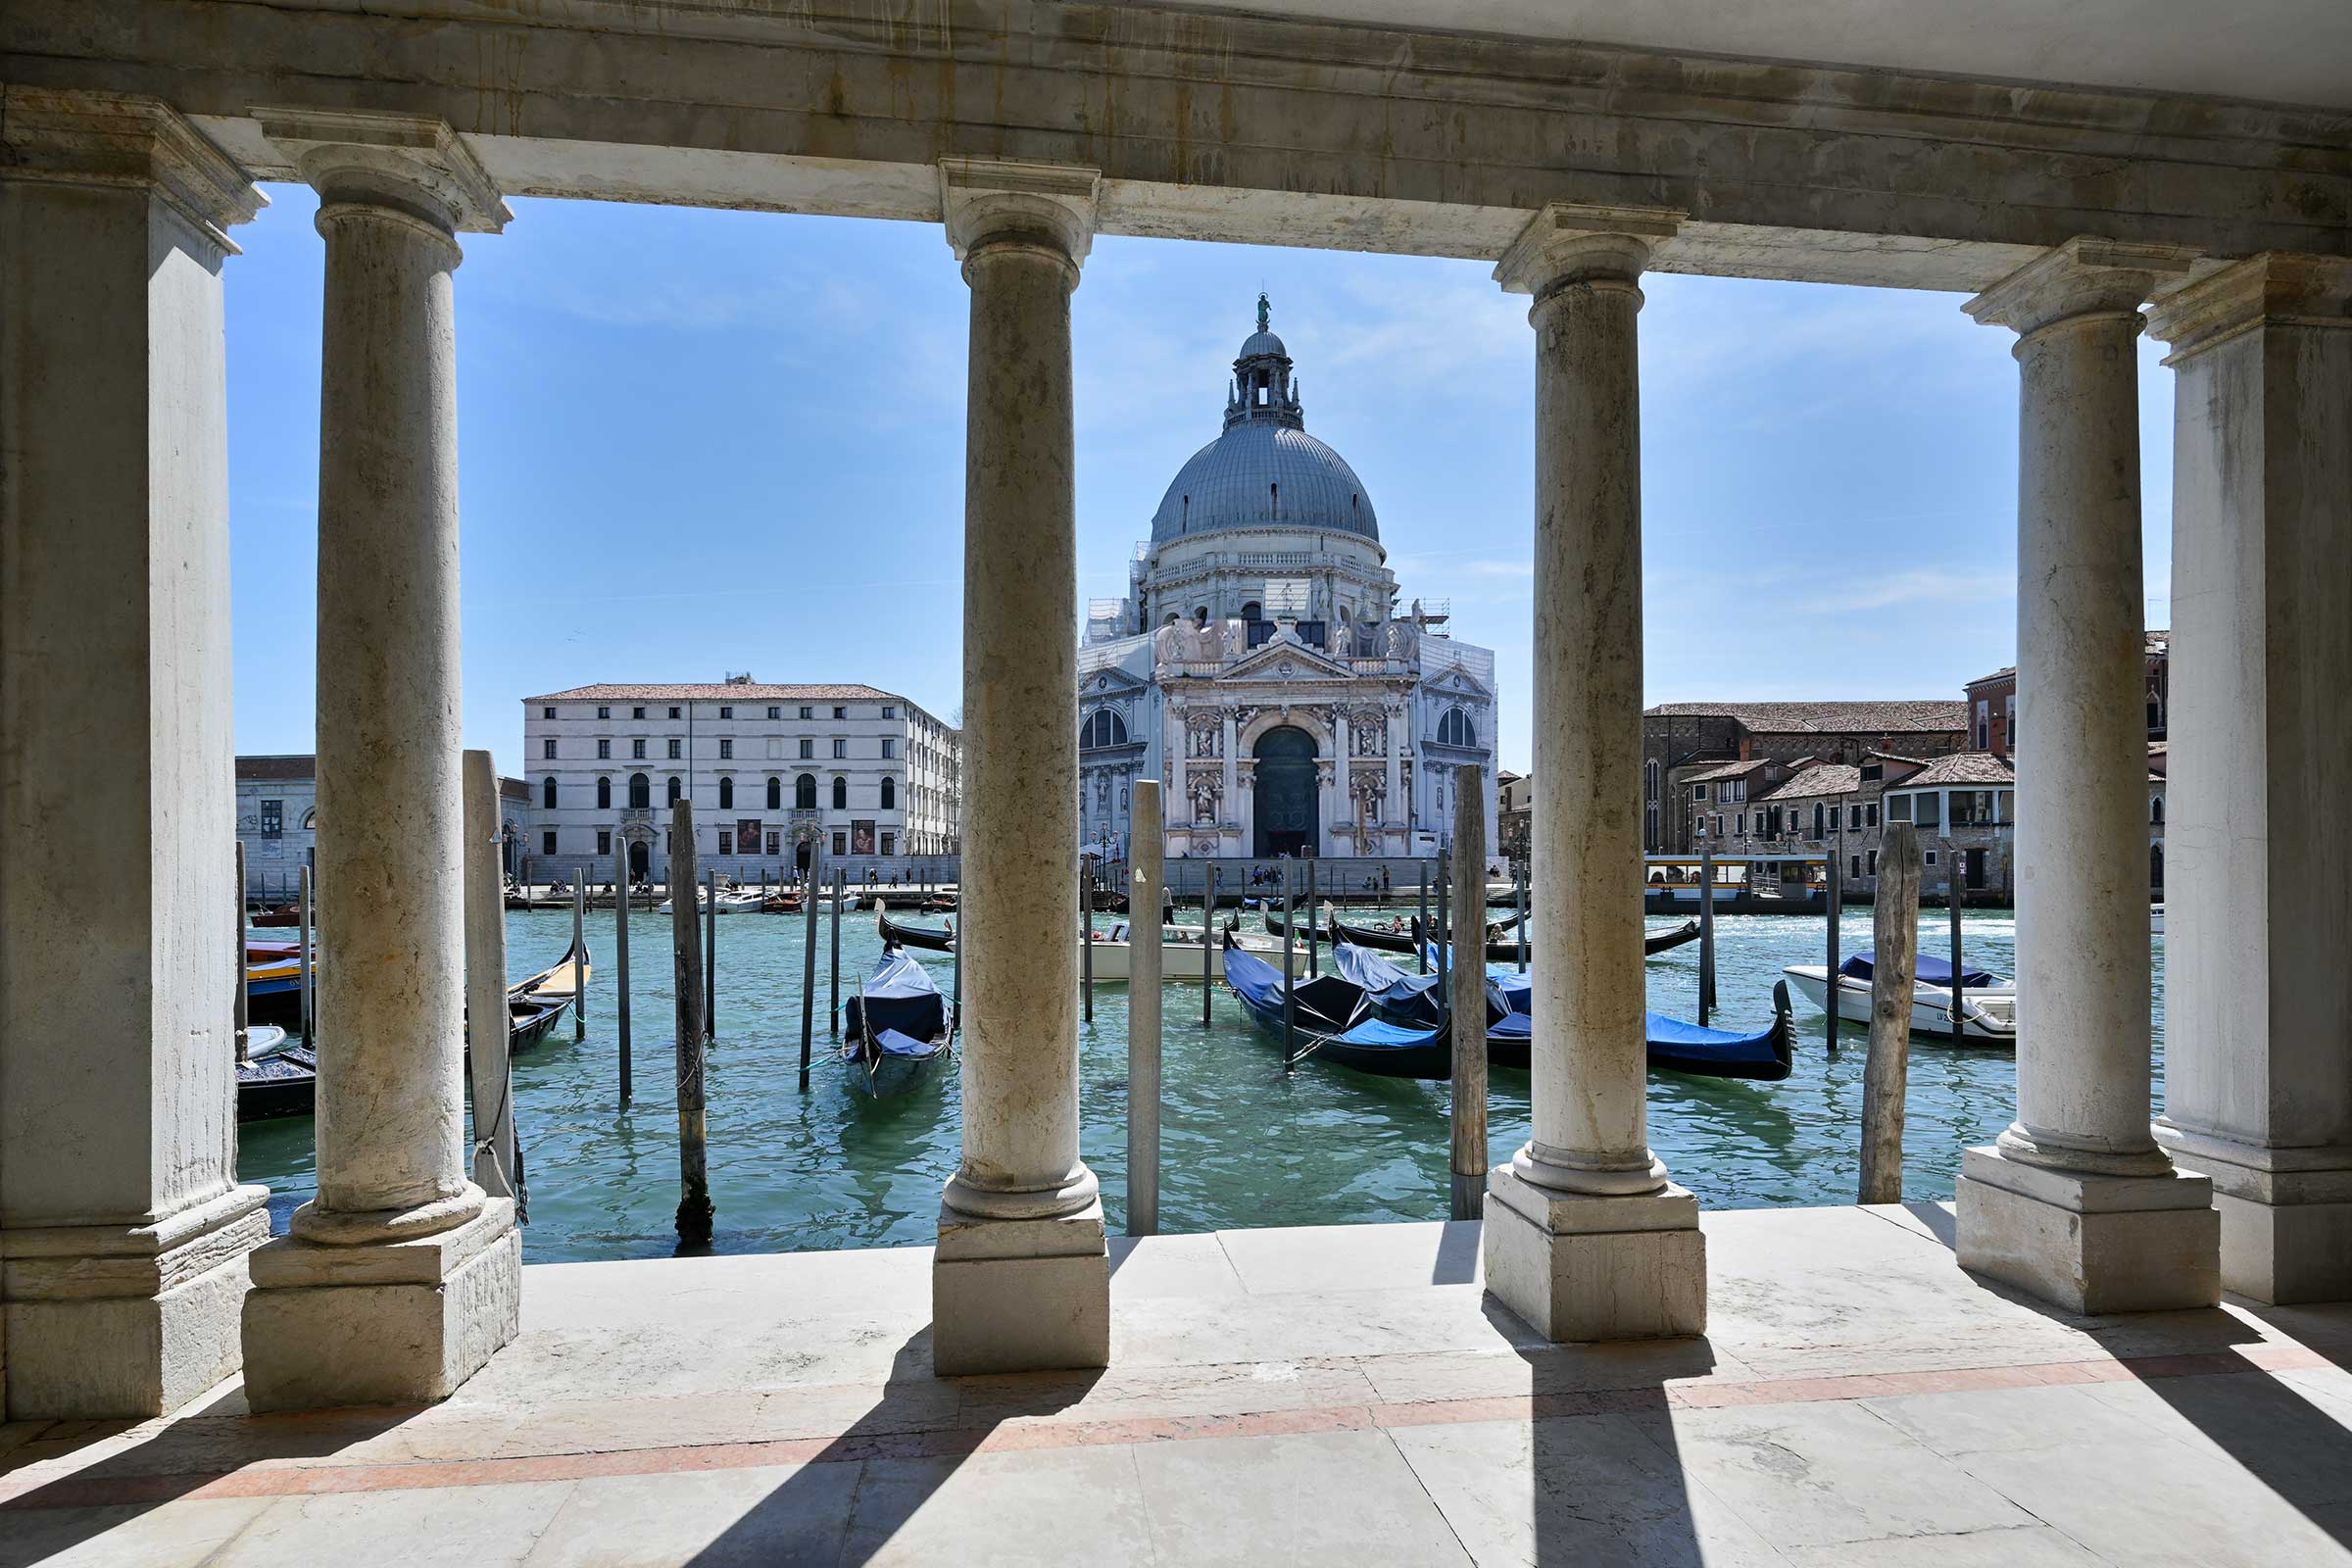 The water taxi will take you directly to the Palazzo water entrance from the Grand Canal